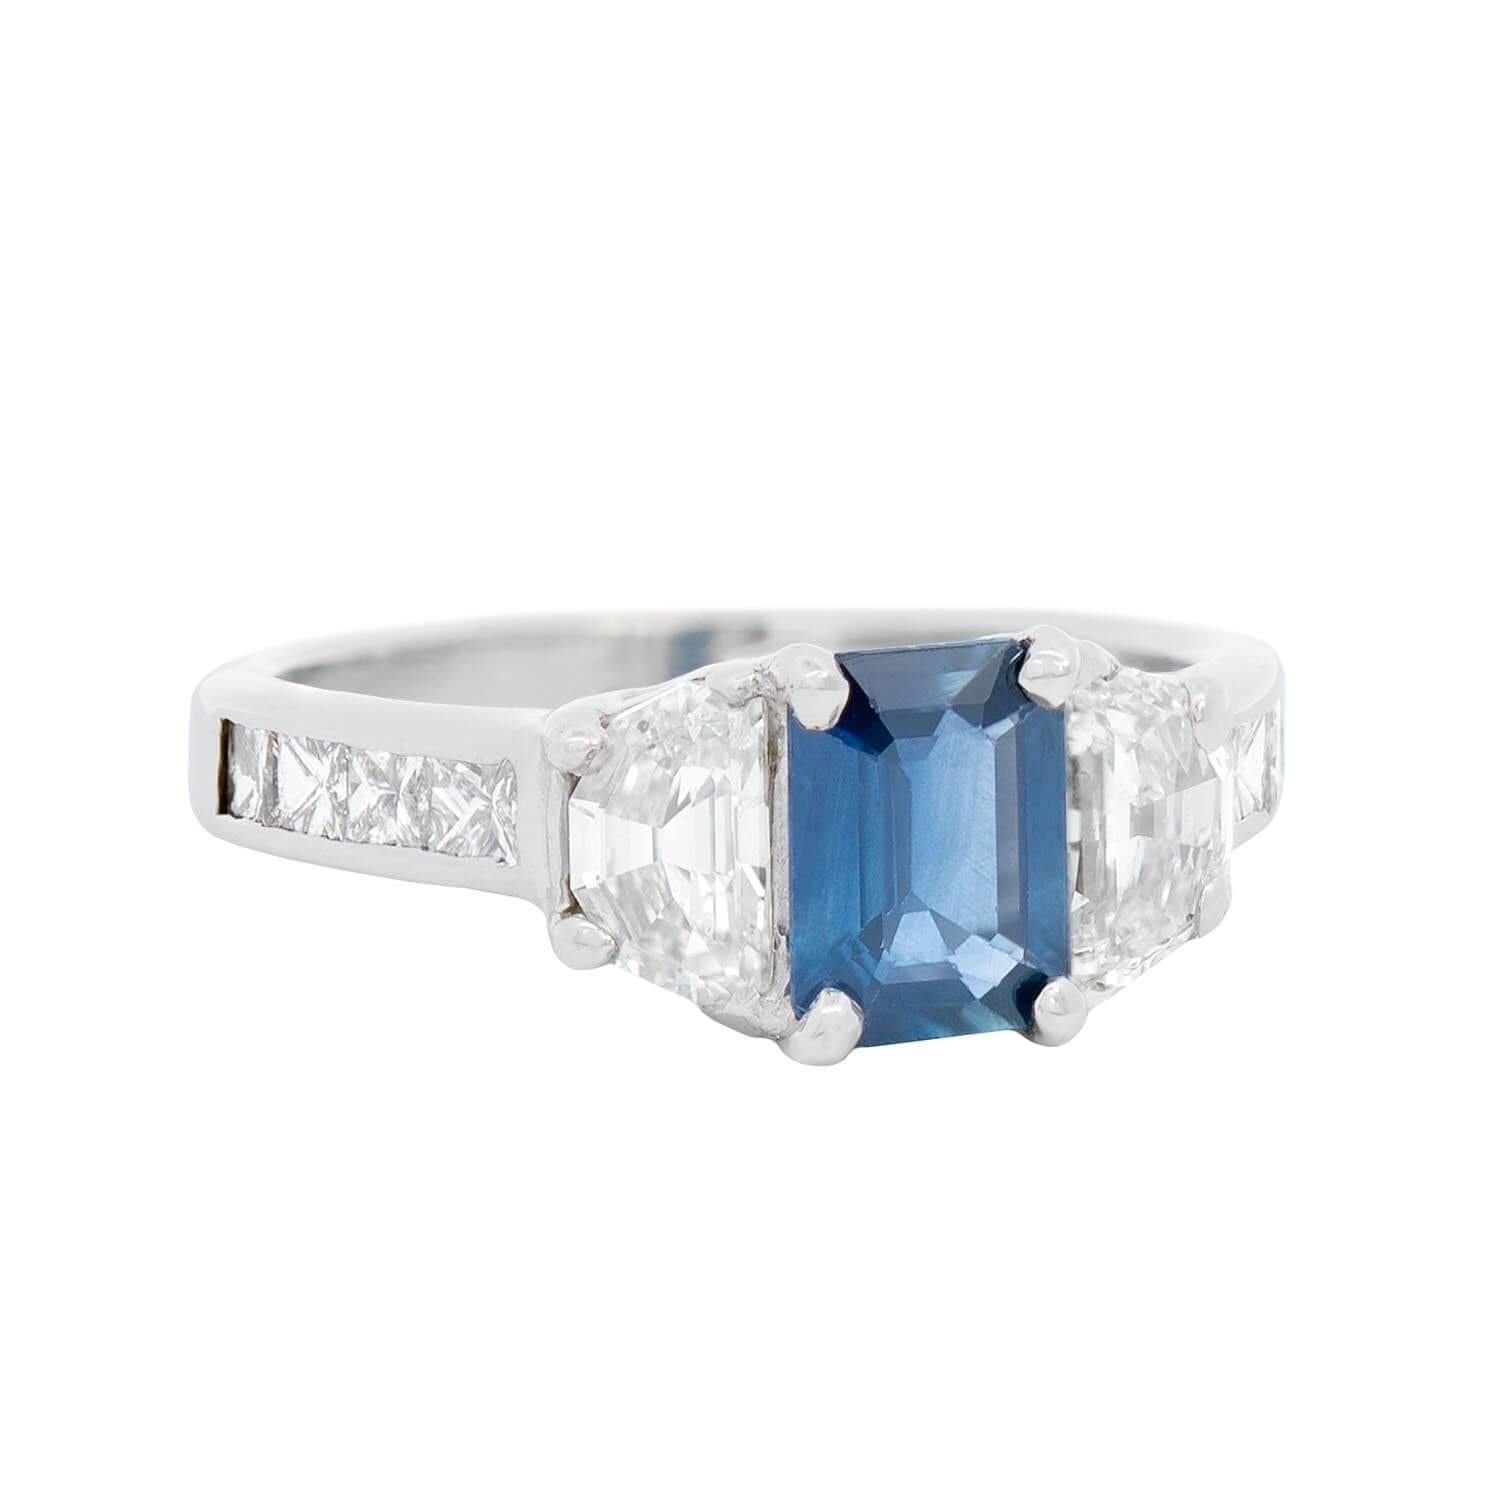 A beautiful Estate sapphire and diamond ring! This gorgeous piece is crafted in 14k white gold and features a vivid 0.85ct emerald sapphire prong set at the center. Framing the sapphire are two prong set Cadillac cut diamonds, which weigh